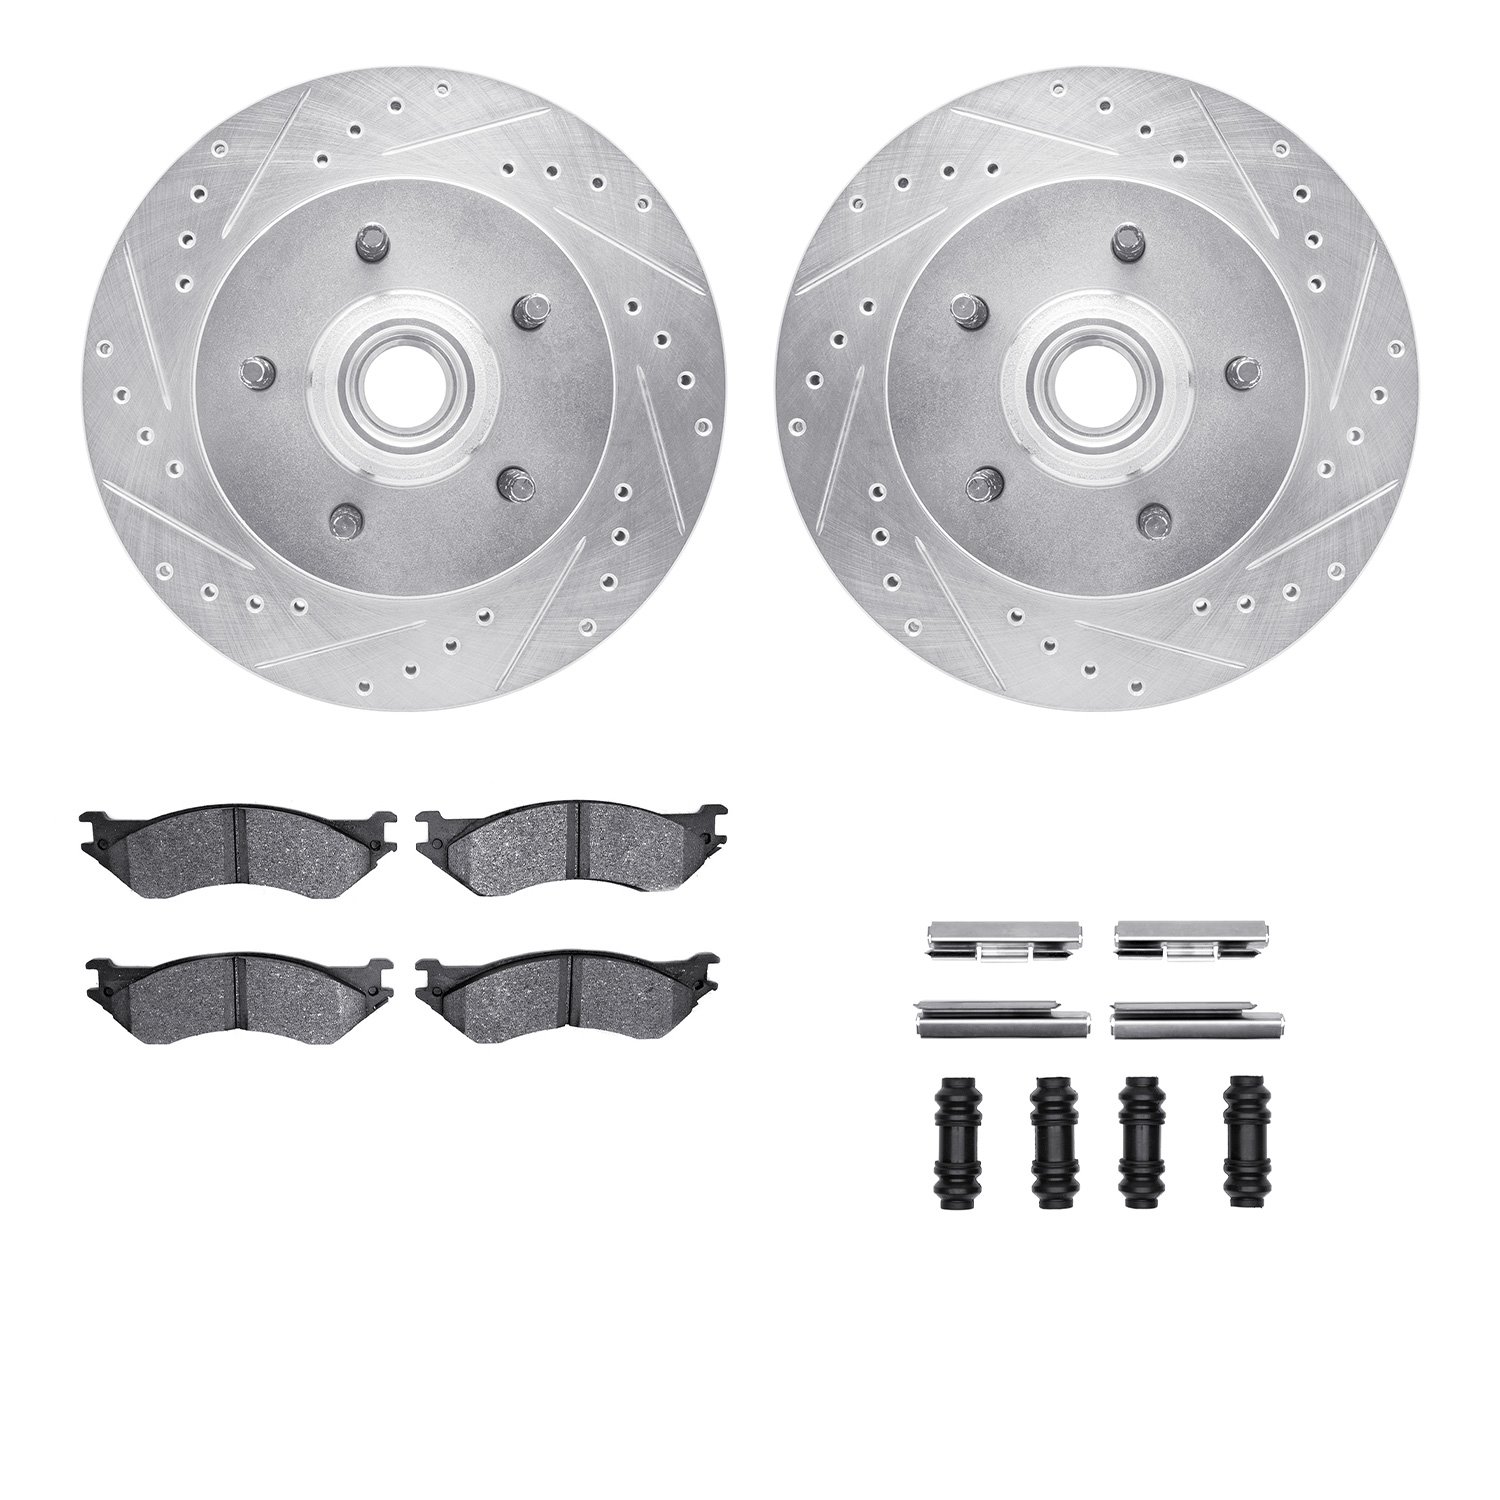 7412-54057 Drilled/Slotted Brake Rotors with Ultimate-Duty Brake Pads Kit & Hardware [Silver], 1999-2004 Ford/Lincoln/Mercury/Ma